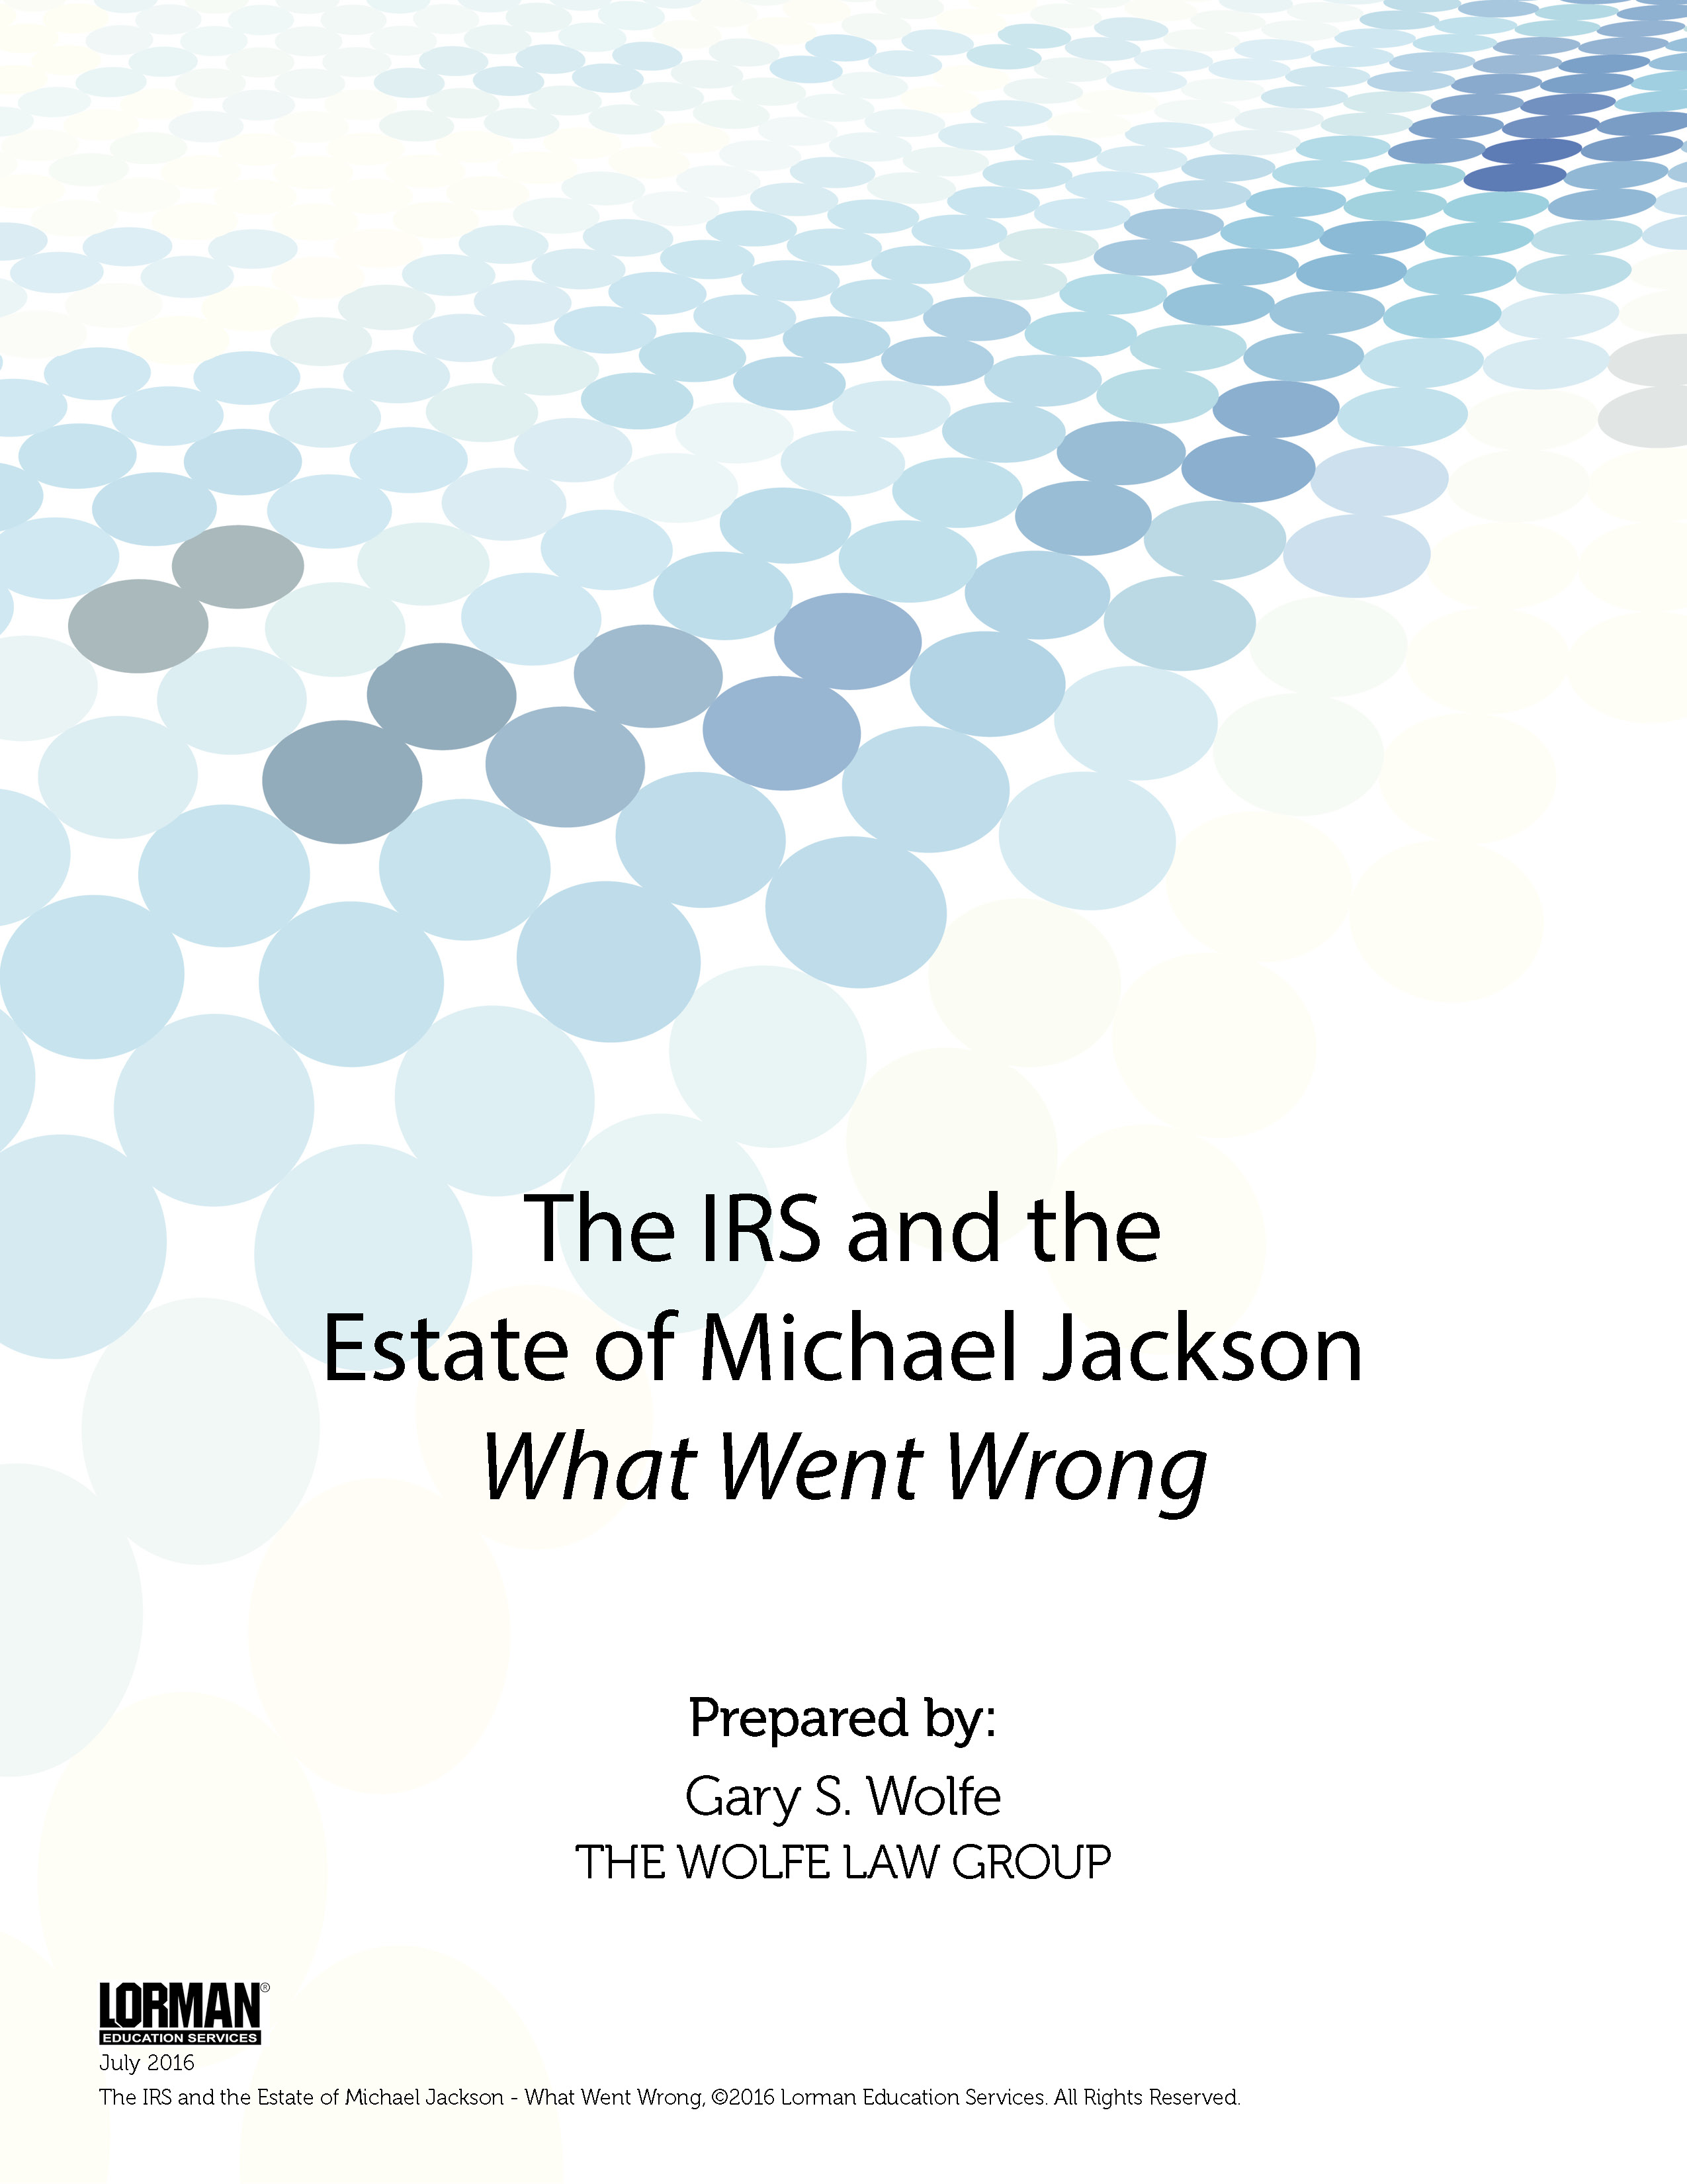 The IRS and the Estate of Michael Jackson - What Went Wrong